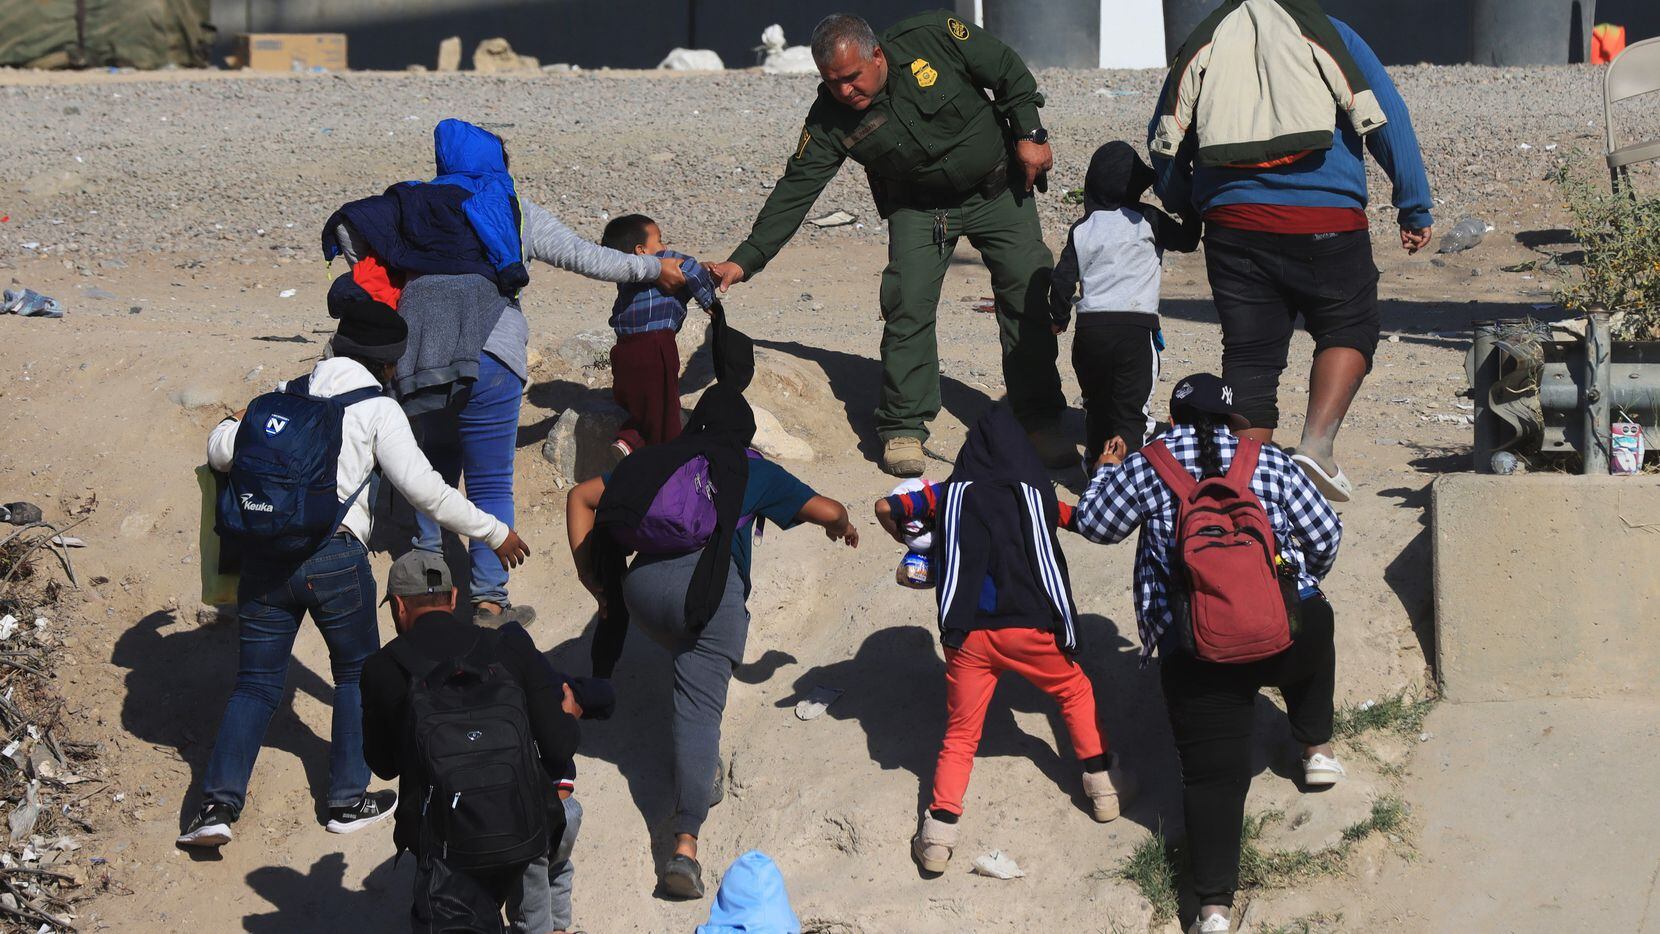 Ongoing negotiations between U.S. and Mexican officials come as more than 1,500 migrants...